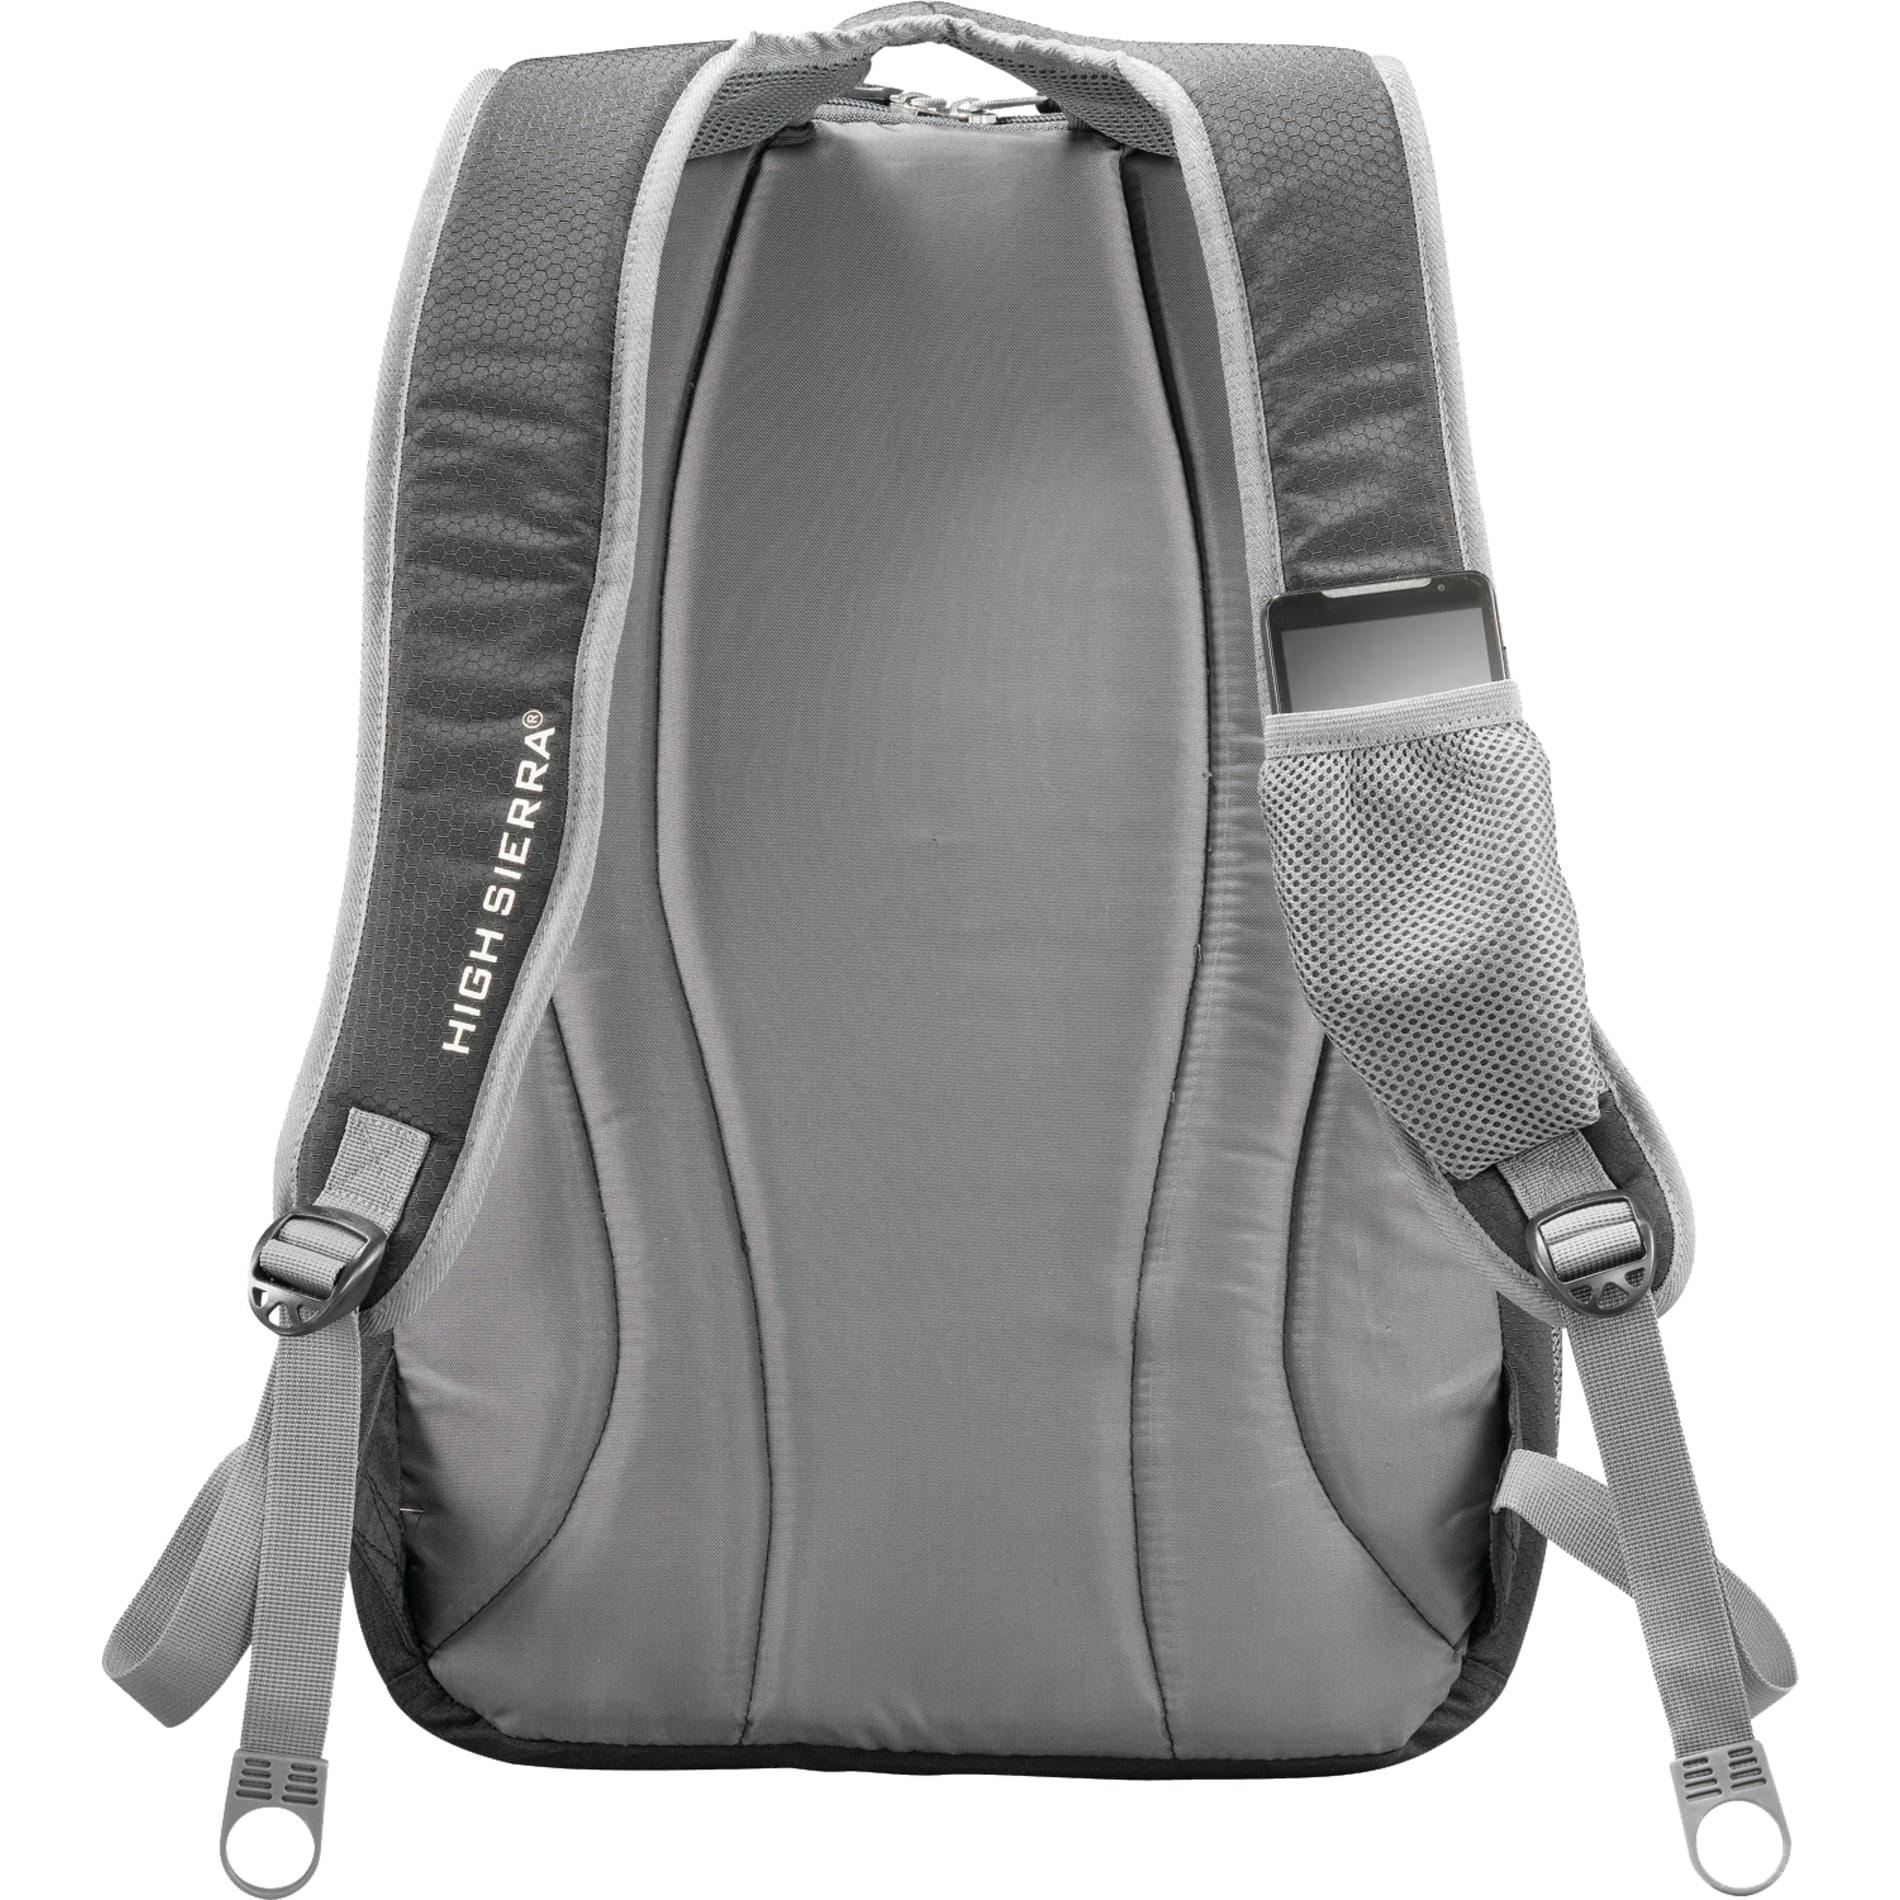 High Sierra Overtime Fly-By 17" Computer Backpack - additional Image 1